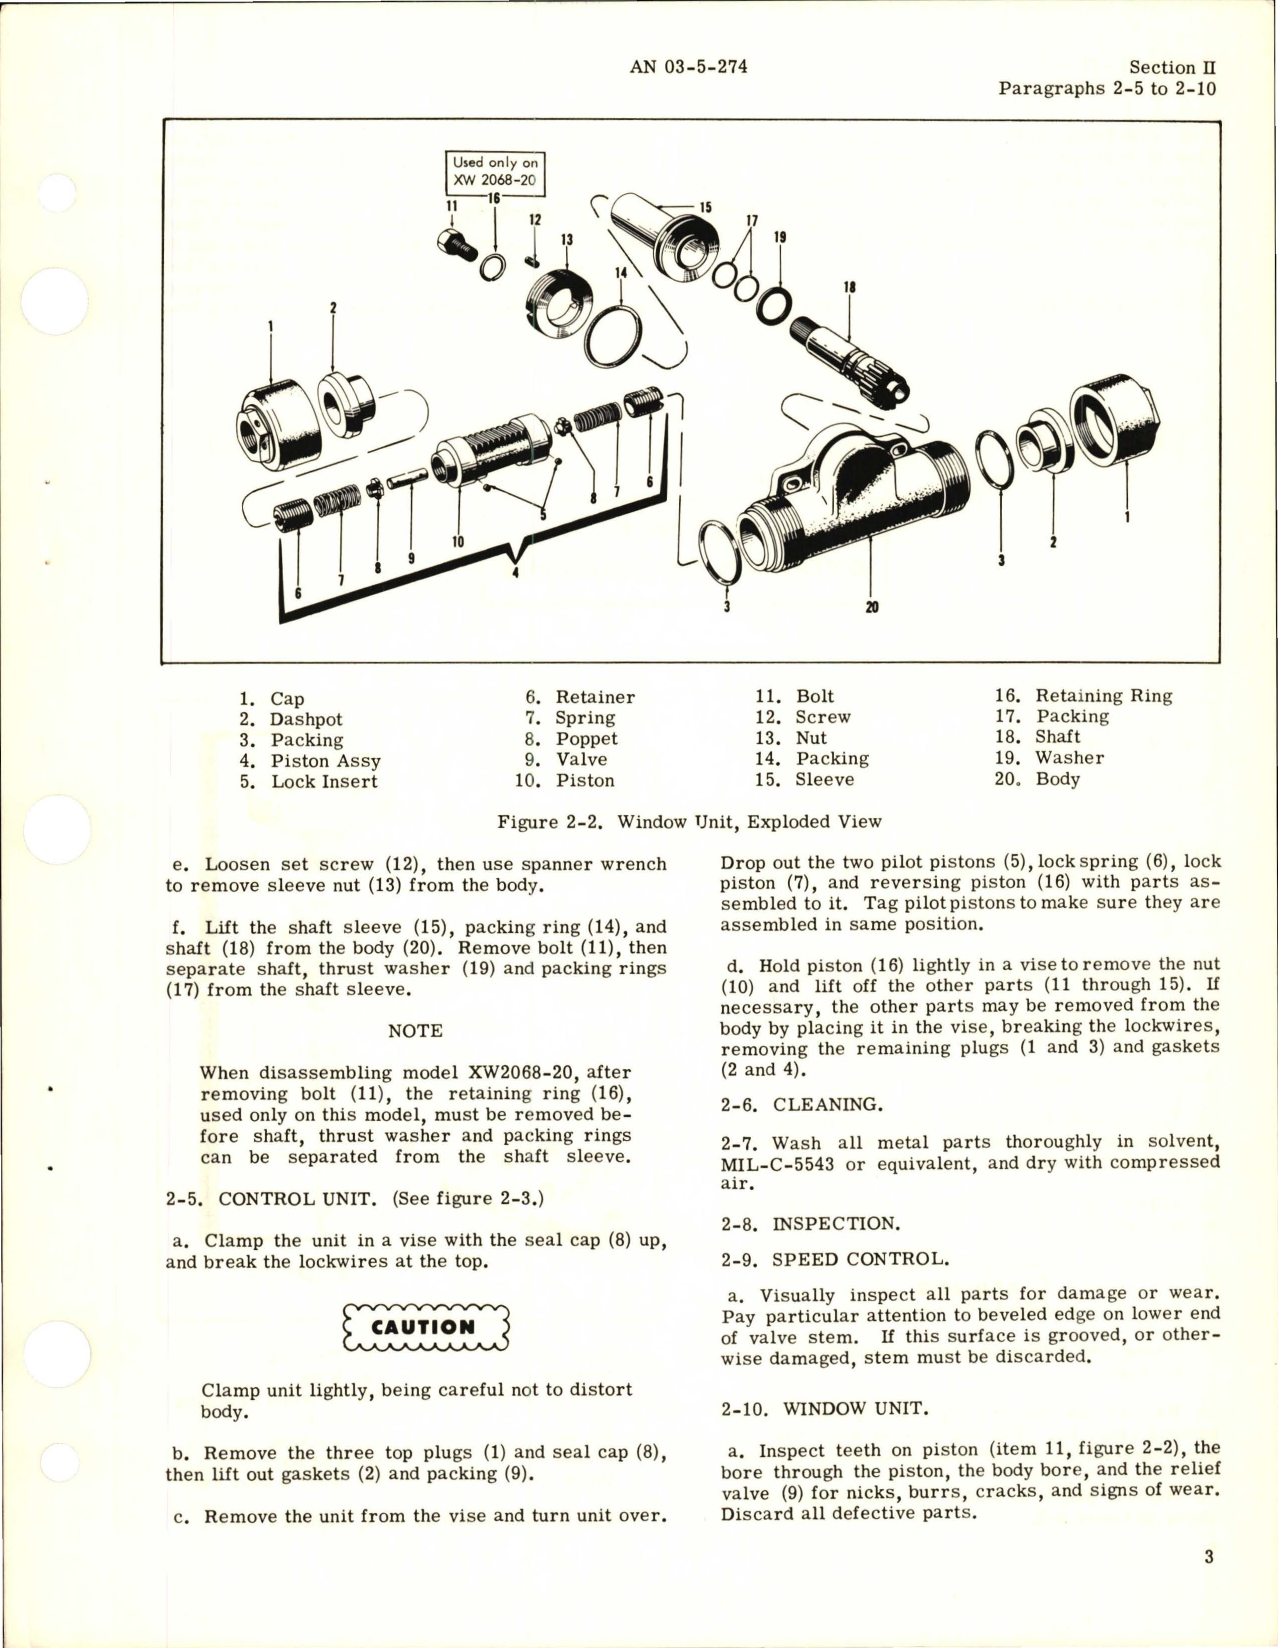 Sample page 7 from AirCorps Library document: Overhaul Instructions for Hydraulic Windshield Wiper Systems Components 